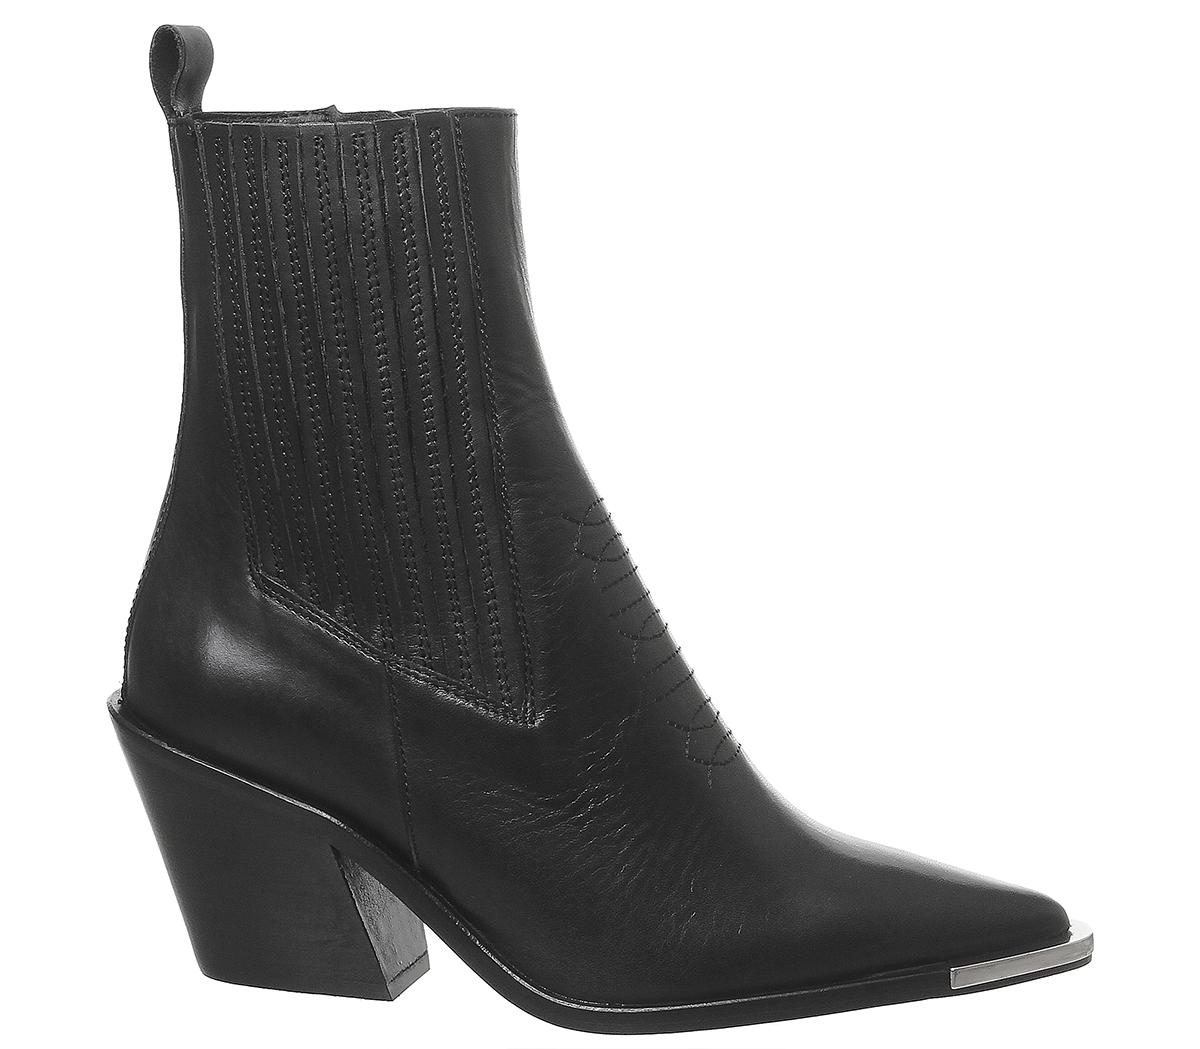 OFFICE Arabella High Cut Western Boots Black Leather - Women's Ankle Boots